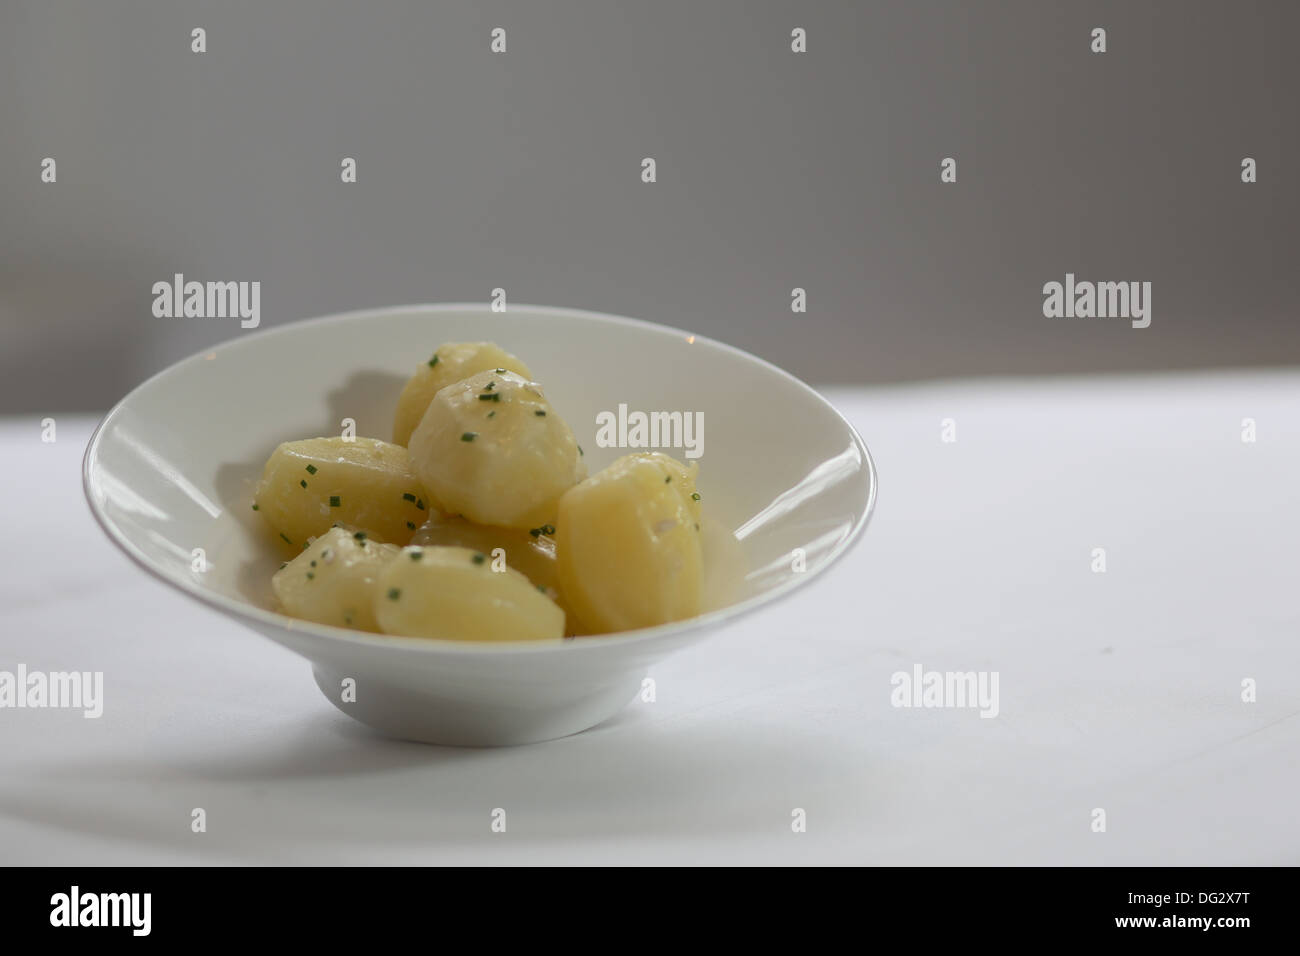 Boiled potatoes with parsley Stock Photo